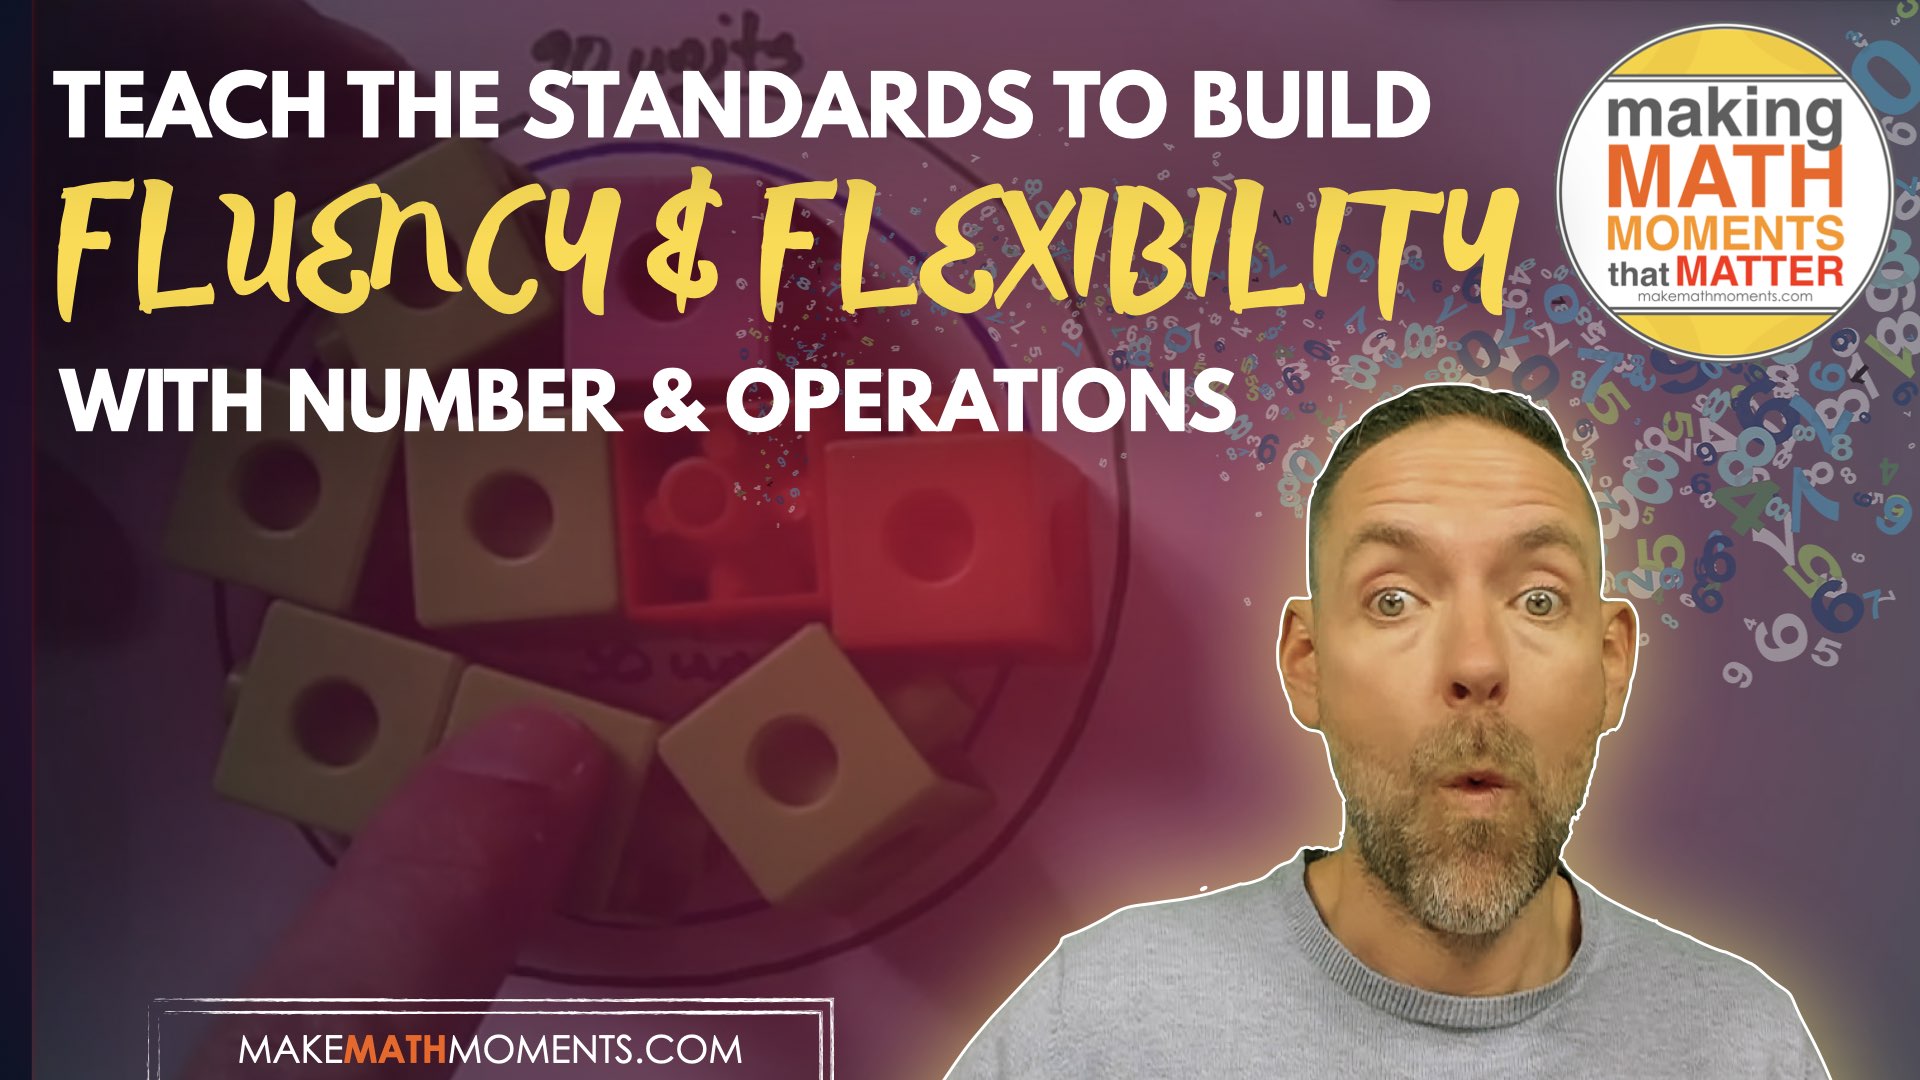 Teach The Standards To Build Fluency and Flexibility With Number and Operations